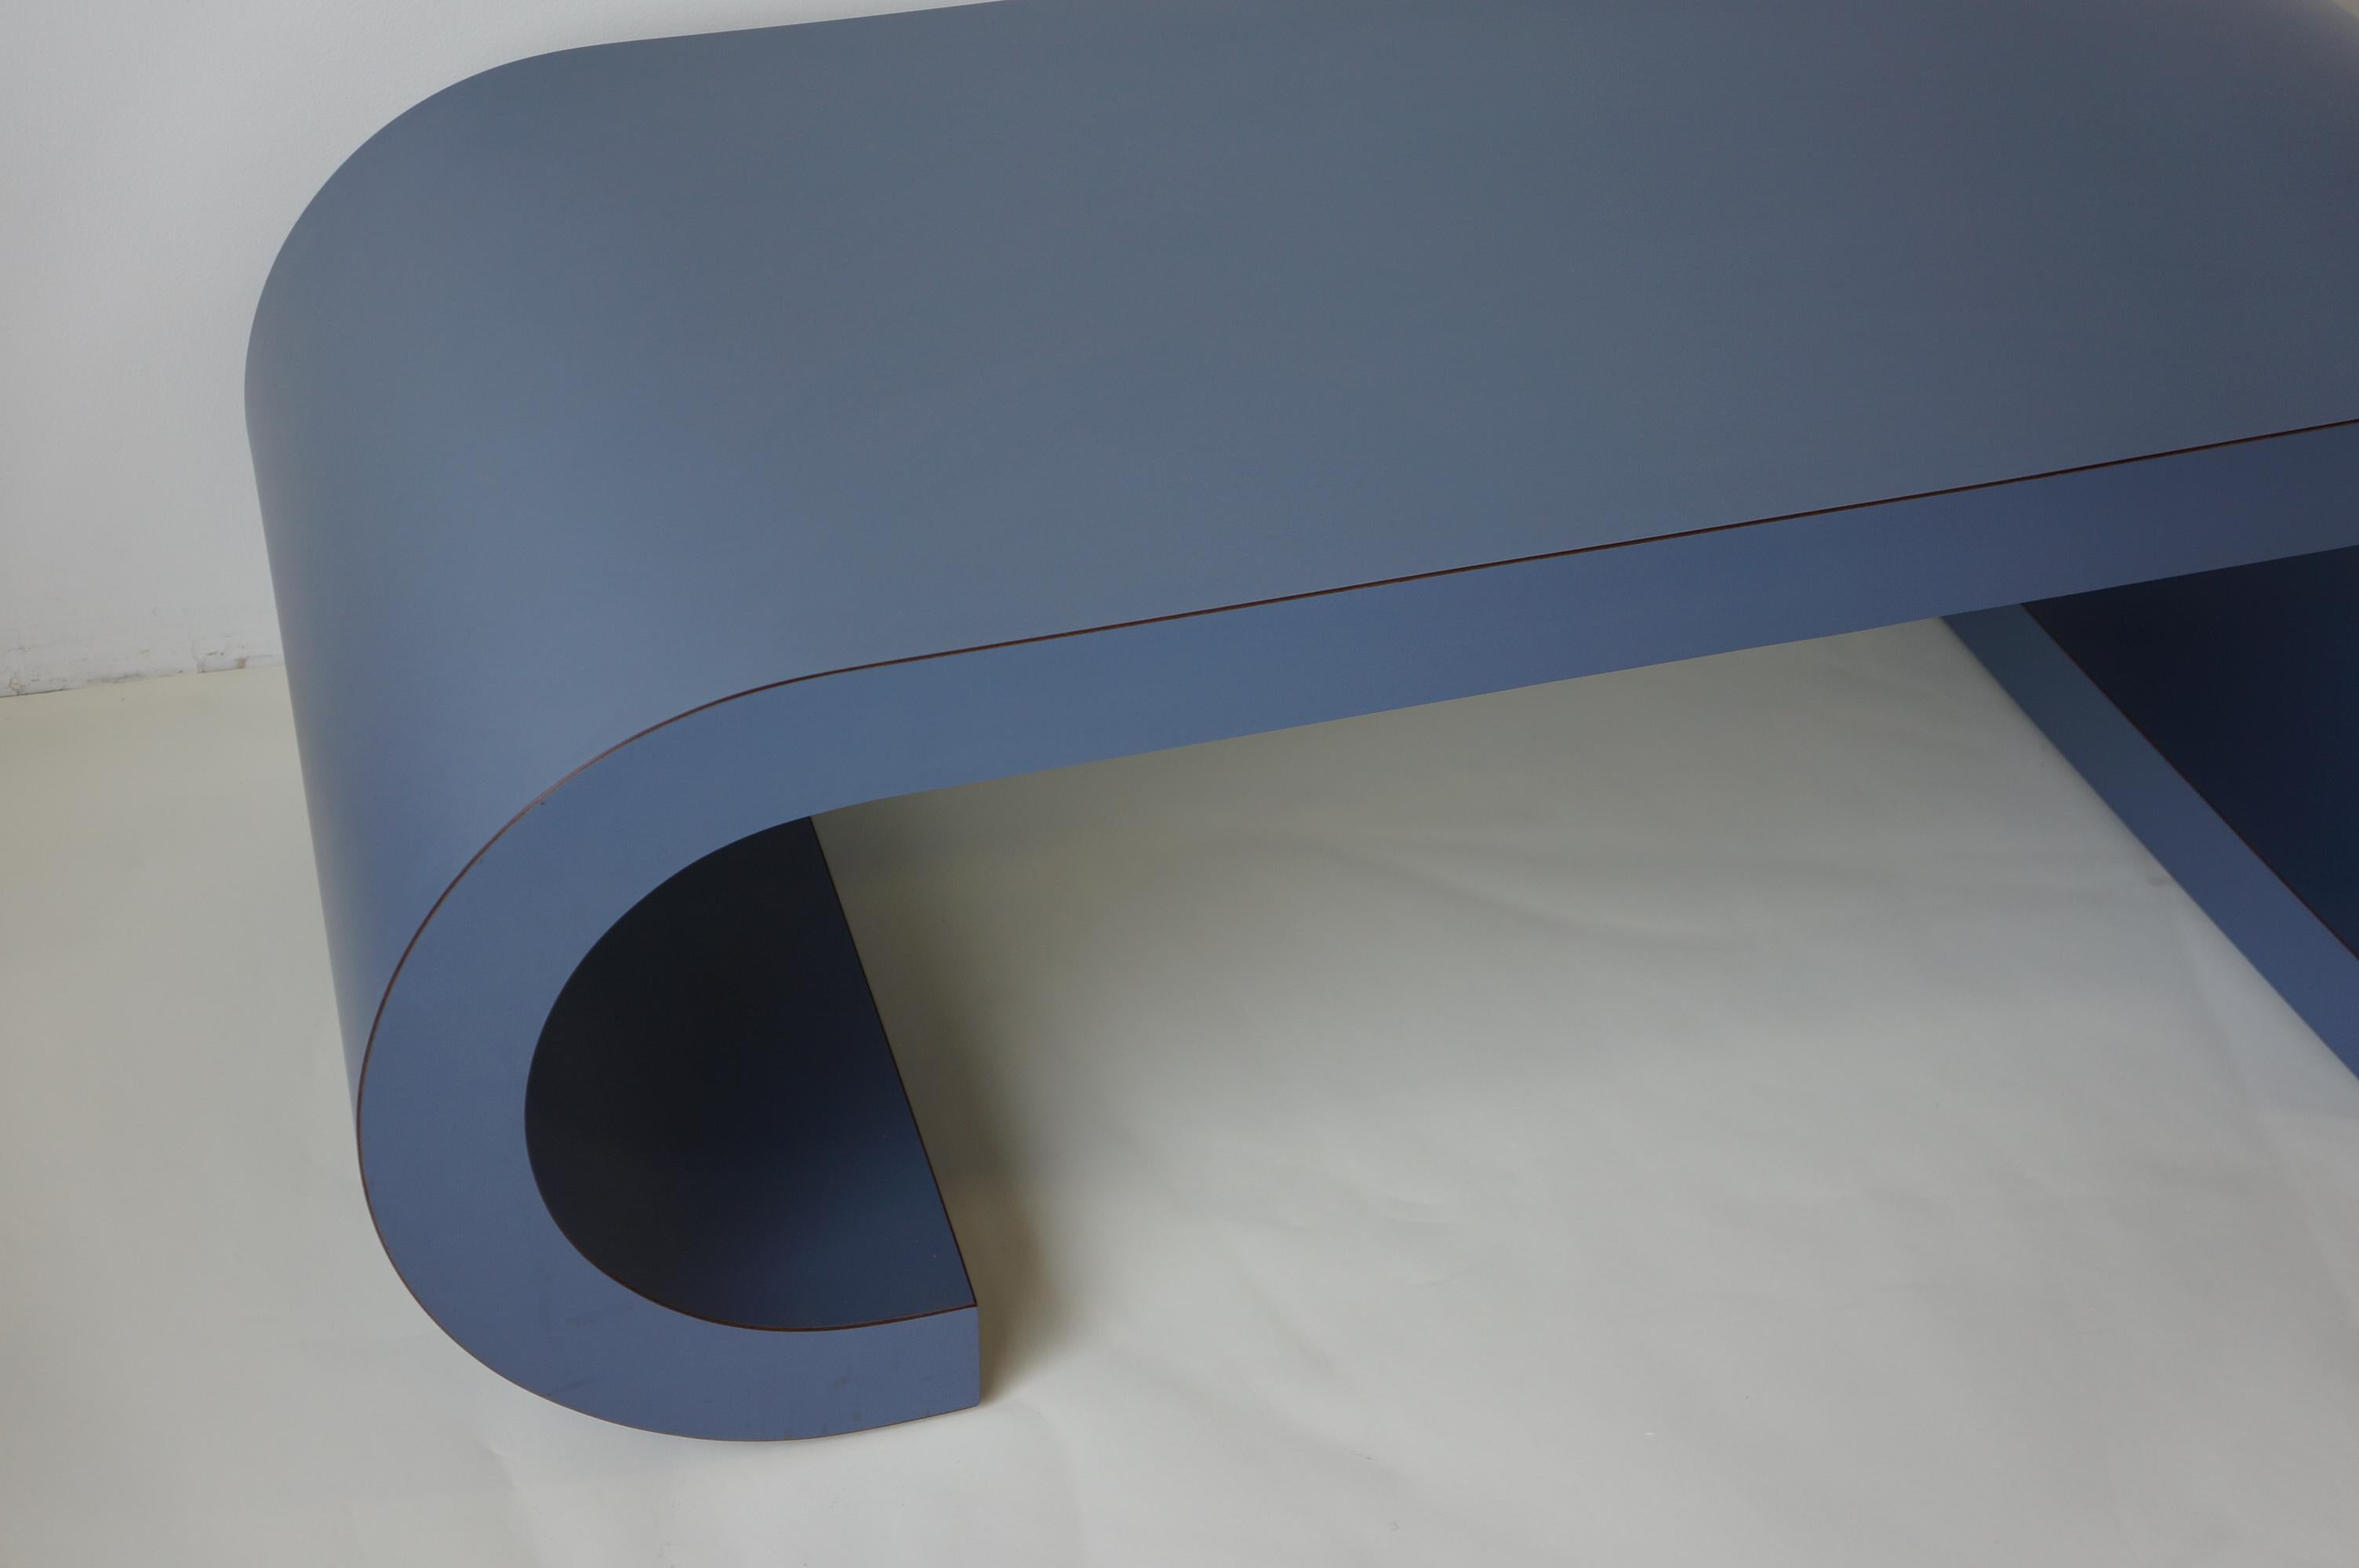 Amazing postmodern custom made coffee table scroll table in a gorgeous colour. This table is laminated in a beautiful blue colour. It was custom built in the late 1980s and this scroll design remains timeless both in its quality and its structure.